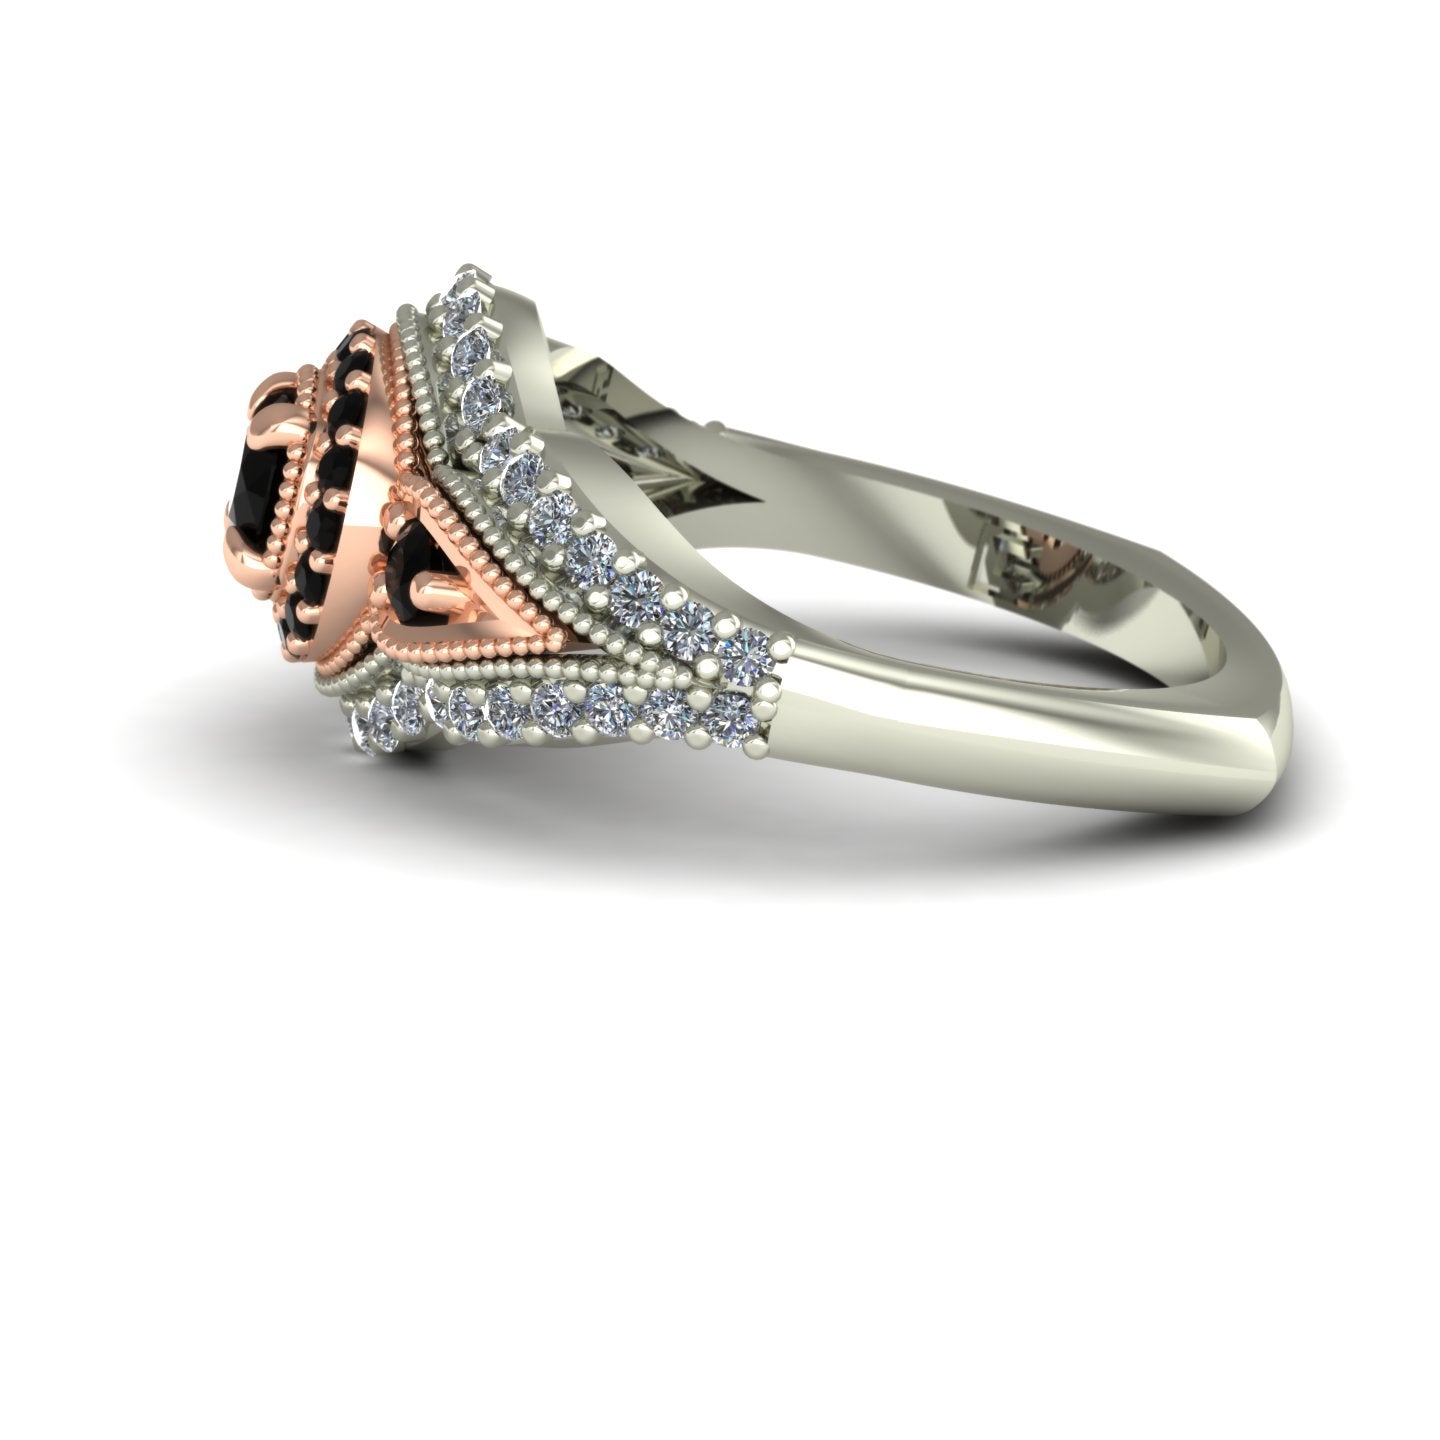 Black diamond two tone engagement ring in 14k white and rose gold - Charles Babb Designs - side view